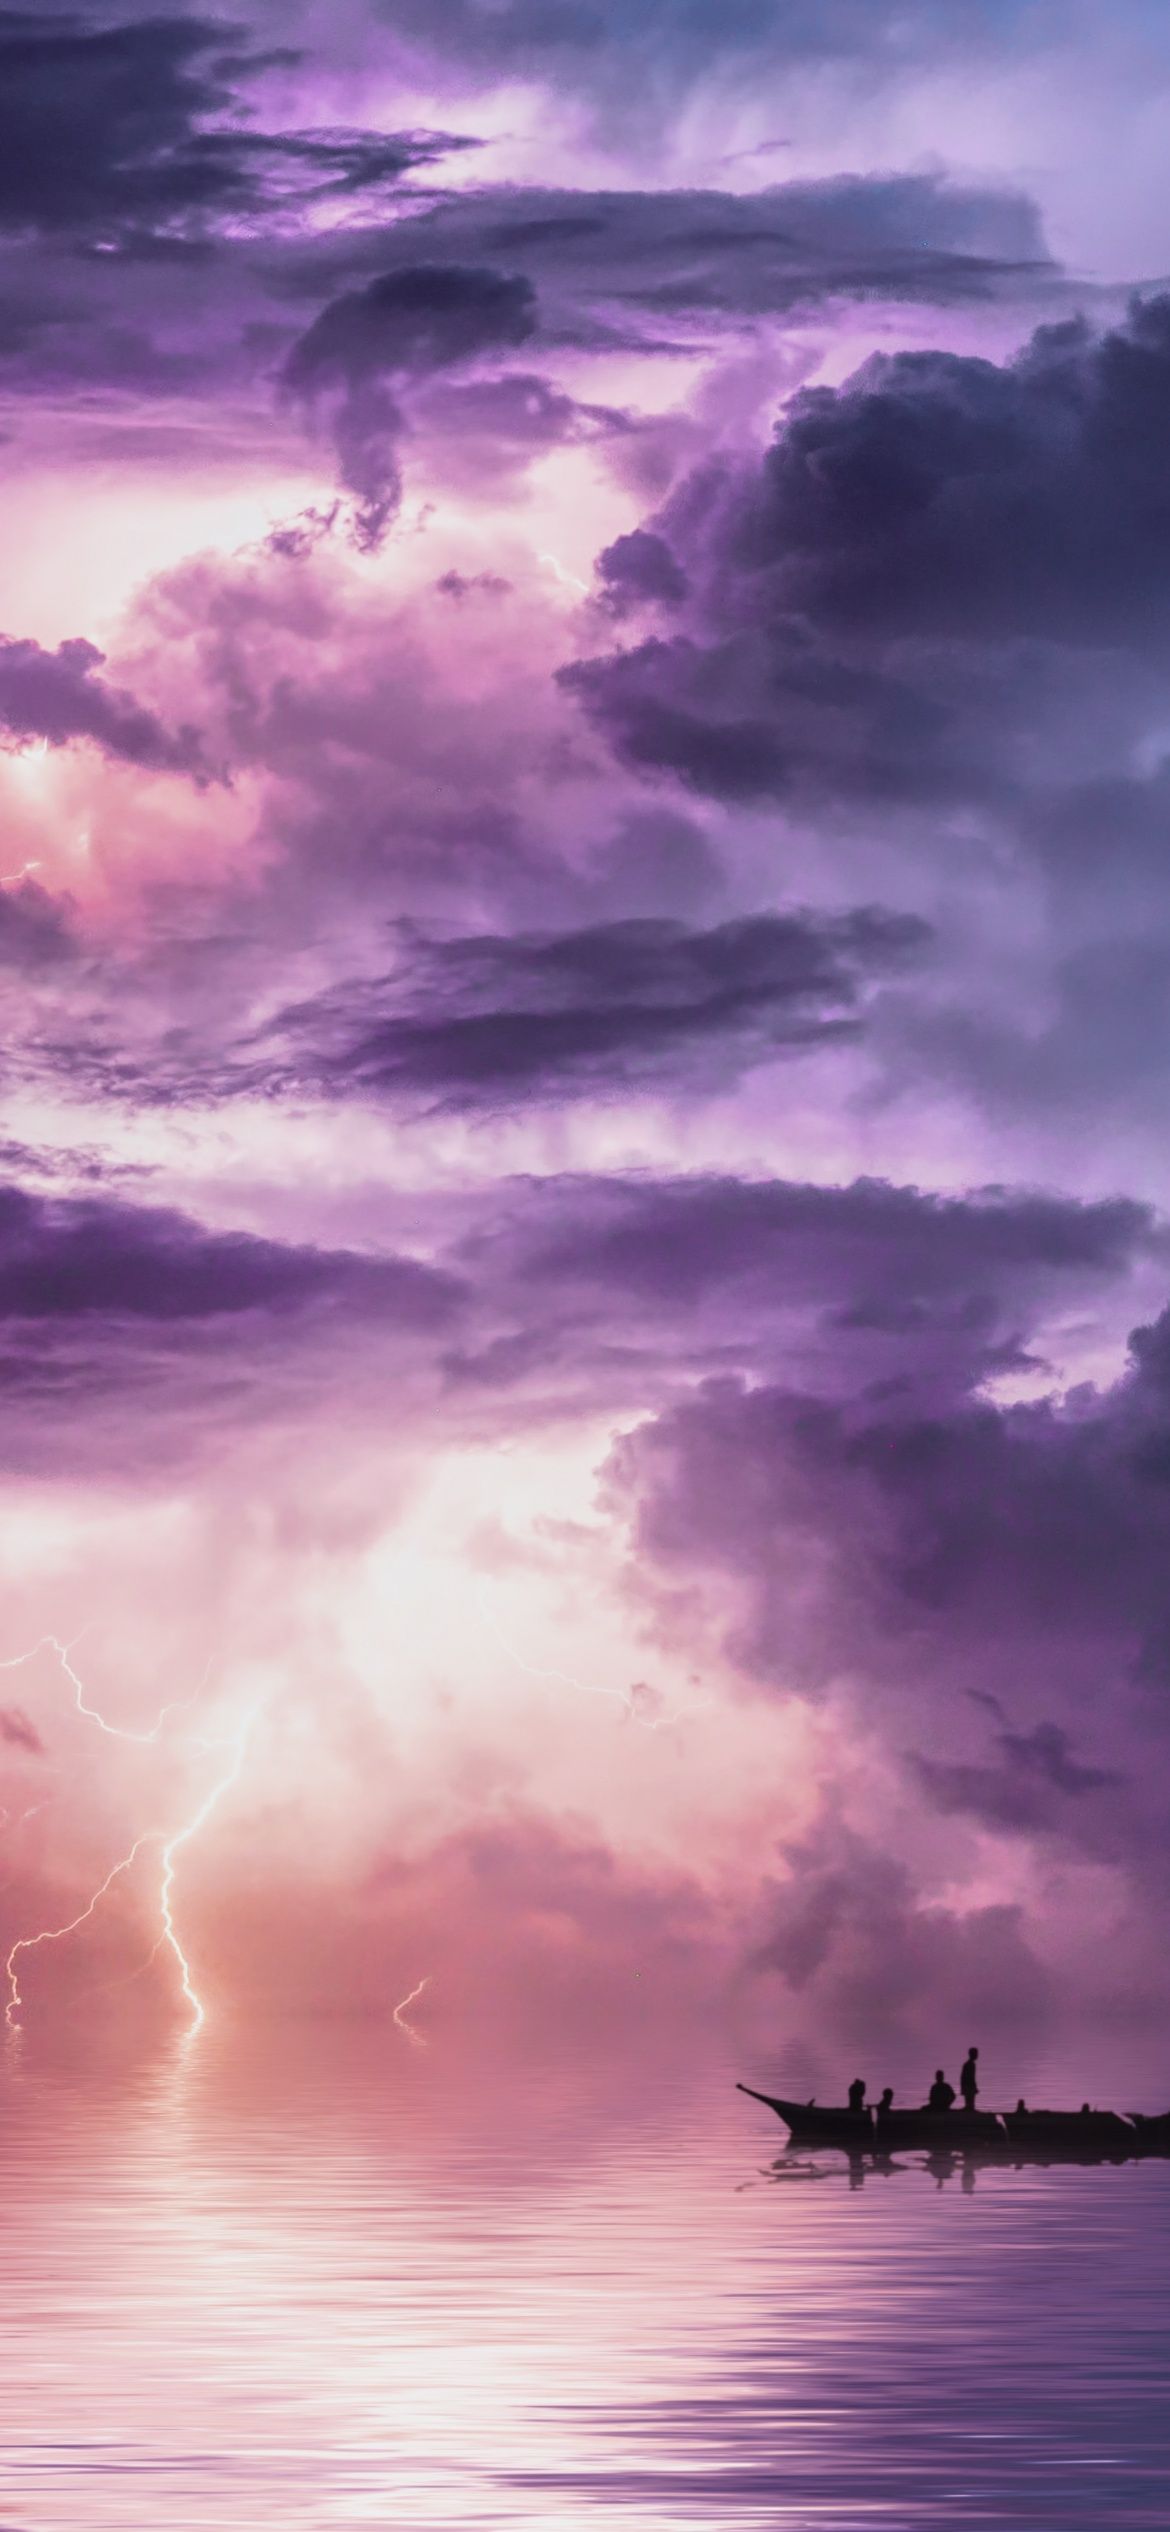 A purple sky with clouds and lightning, with a boat in the foreground. - Storm